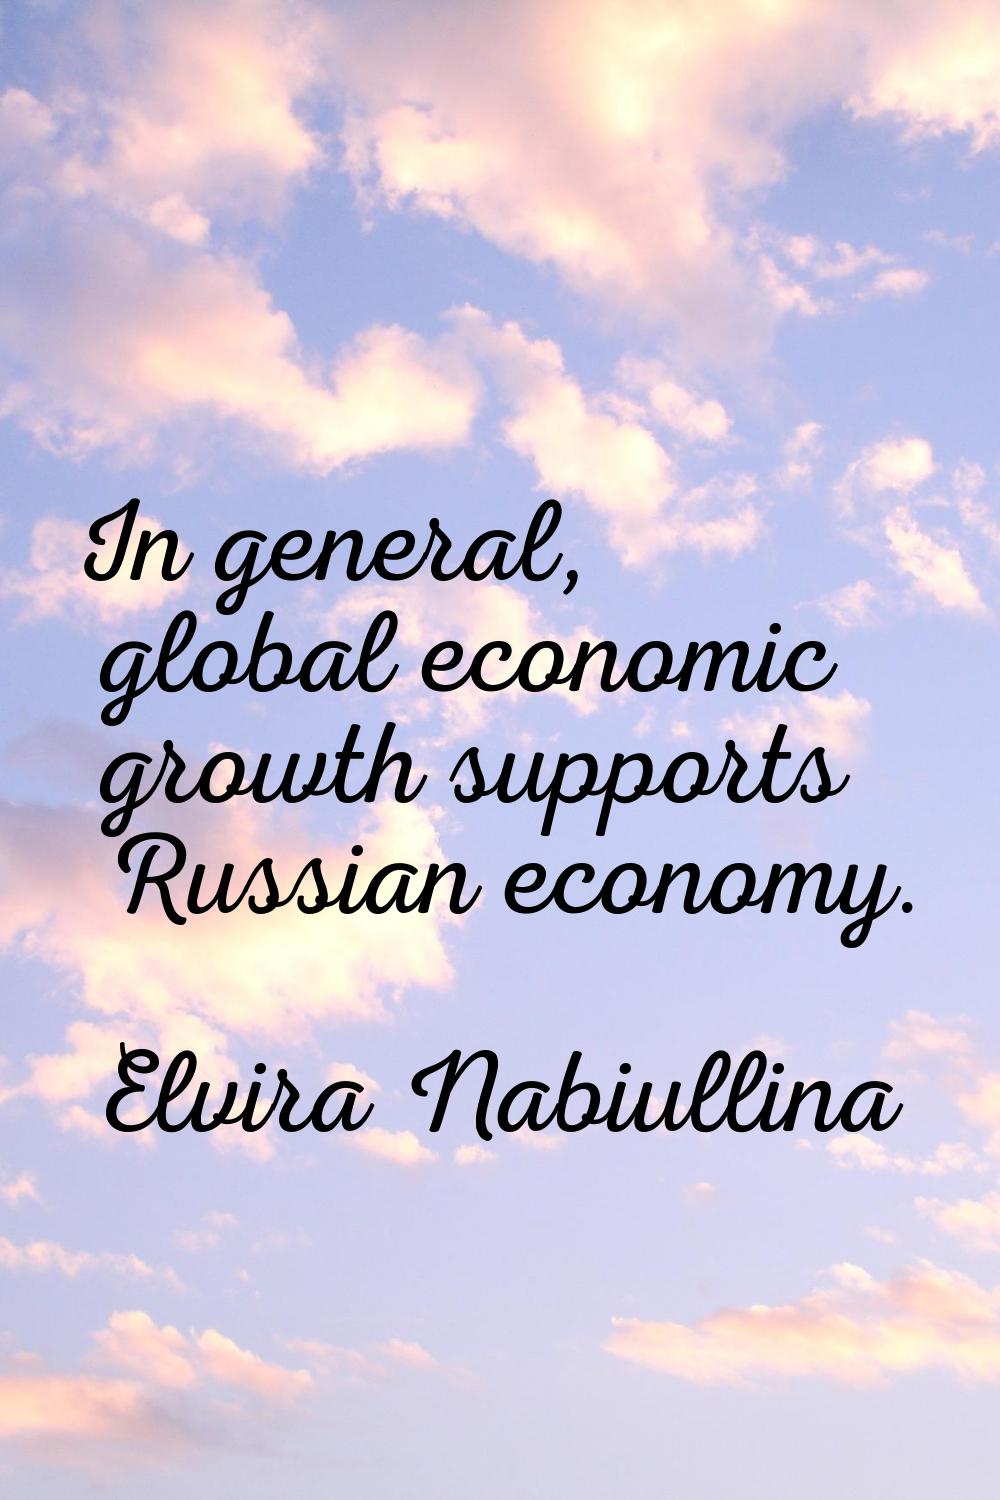 In general, global economic growth supports Russian economy.